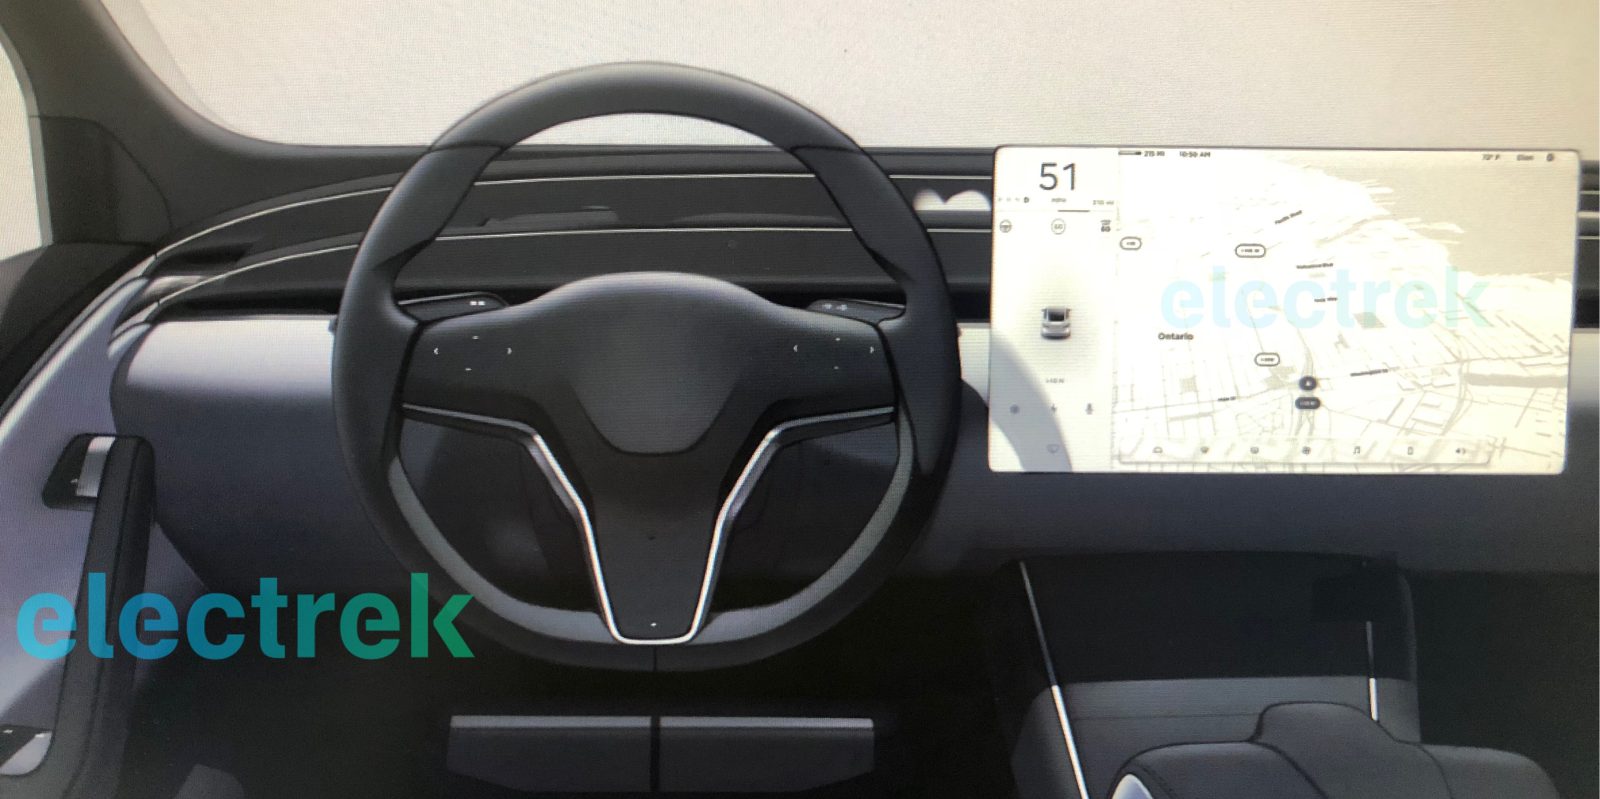 Exclusive First Look At Tesla Model S And Model X Interior